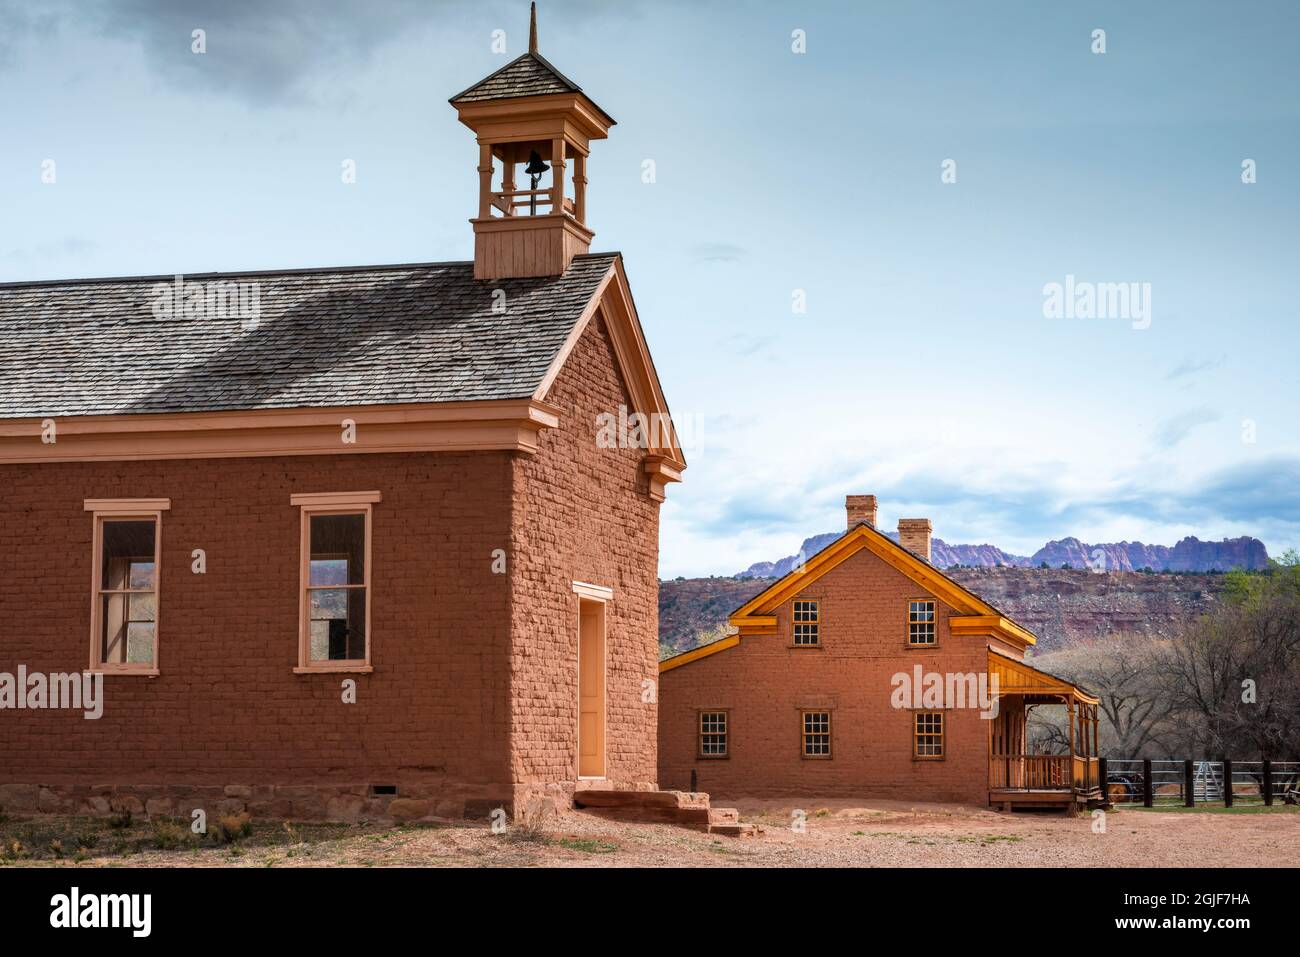 Alonzo Russell adobe house (featured in the film 'Butch Cassidy and the Sundance Kid') and schoolhouse, Grafton ghost town, Utah, USA. Stock Photo